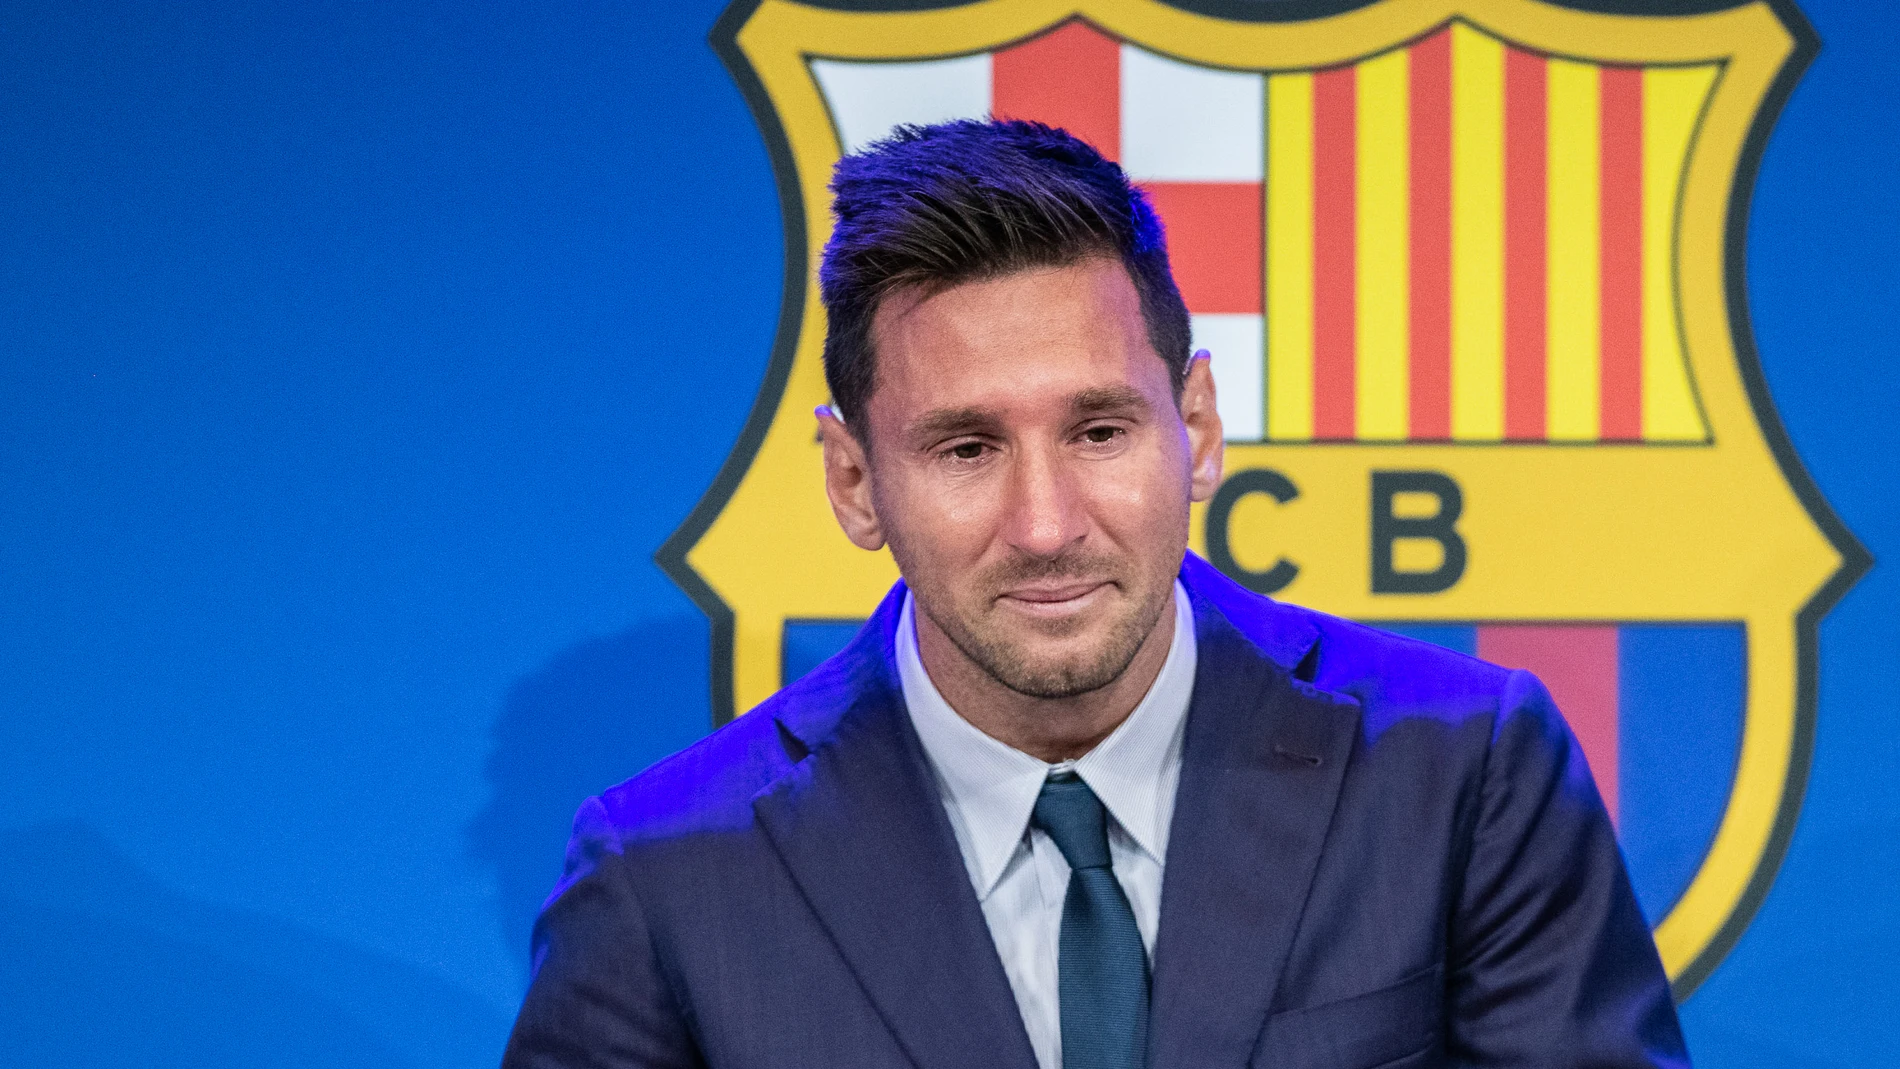 Lionel "Leo" Messi laments during his press conference to talk about his departure from FC Barcelona at Camp Nou stadium on August 08, 2021, in Barcelona, SpainAFP7 08/08/2021 ONLY FOR USE IN SPAIN